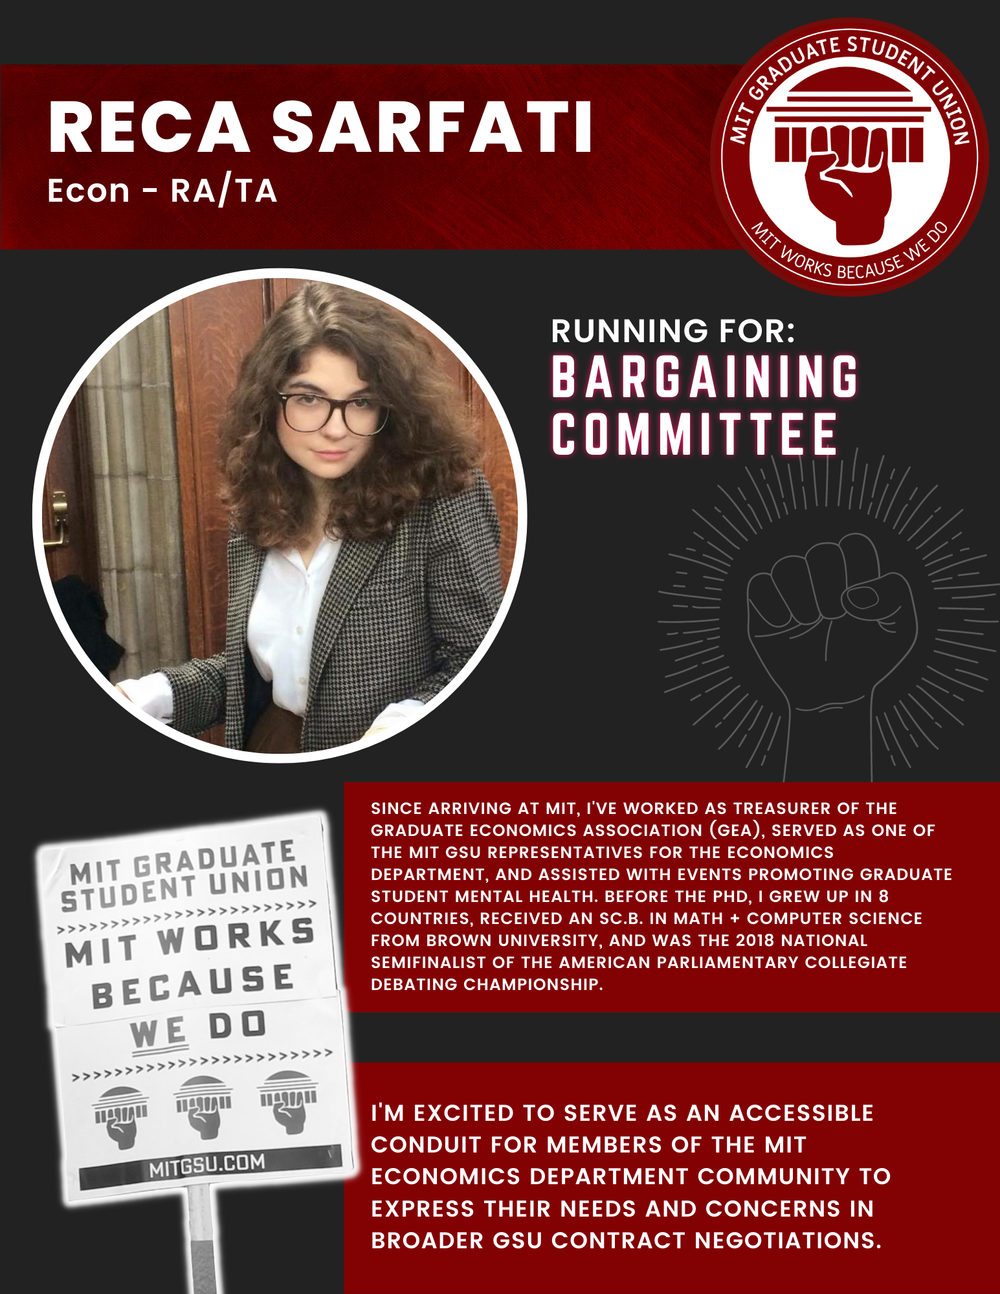  RECA SARFATI  Econ - RA/TA   RUNNING FOR:  Bargaining Committee  SINCE ARRIVING AT MIT, I'VE WORKED AS TREASURER OF THE GRADUATE ECONOMICS ASSOCIATION (GEA), SERVED AS ONE OF THE MIT GSU REPRESENTATIVES FOR THE ECONOMICS DEPARTMENT, AND ASSISTED WIT